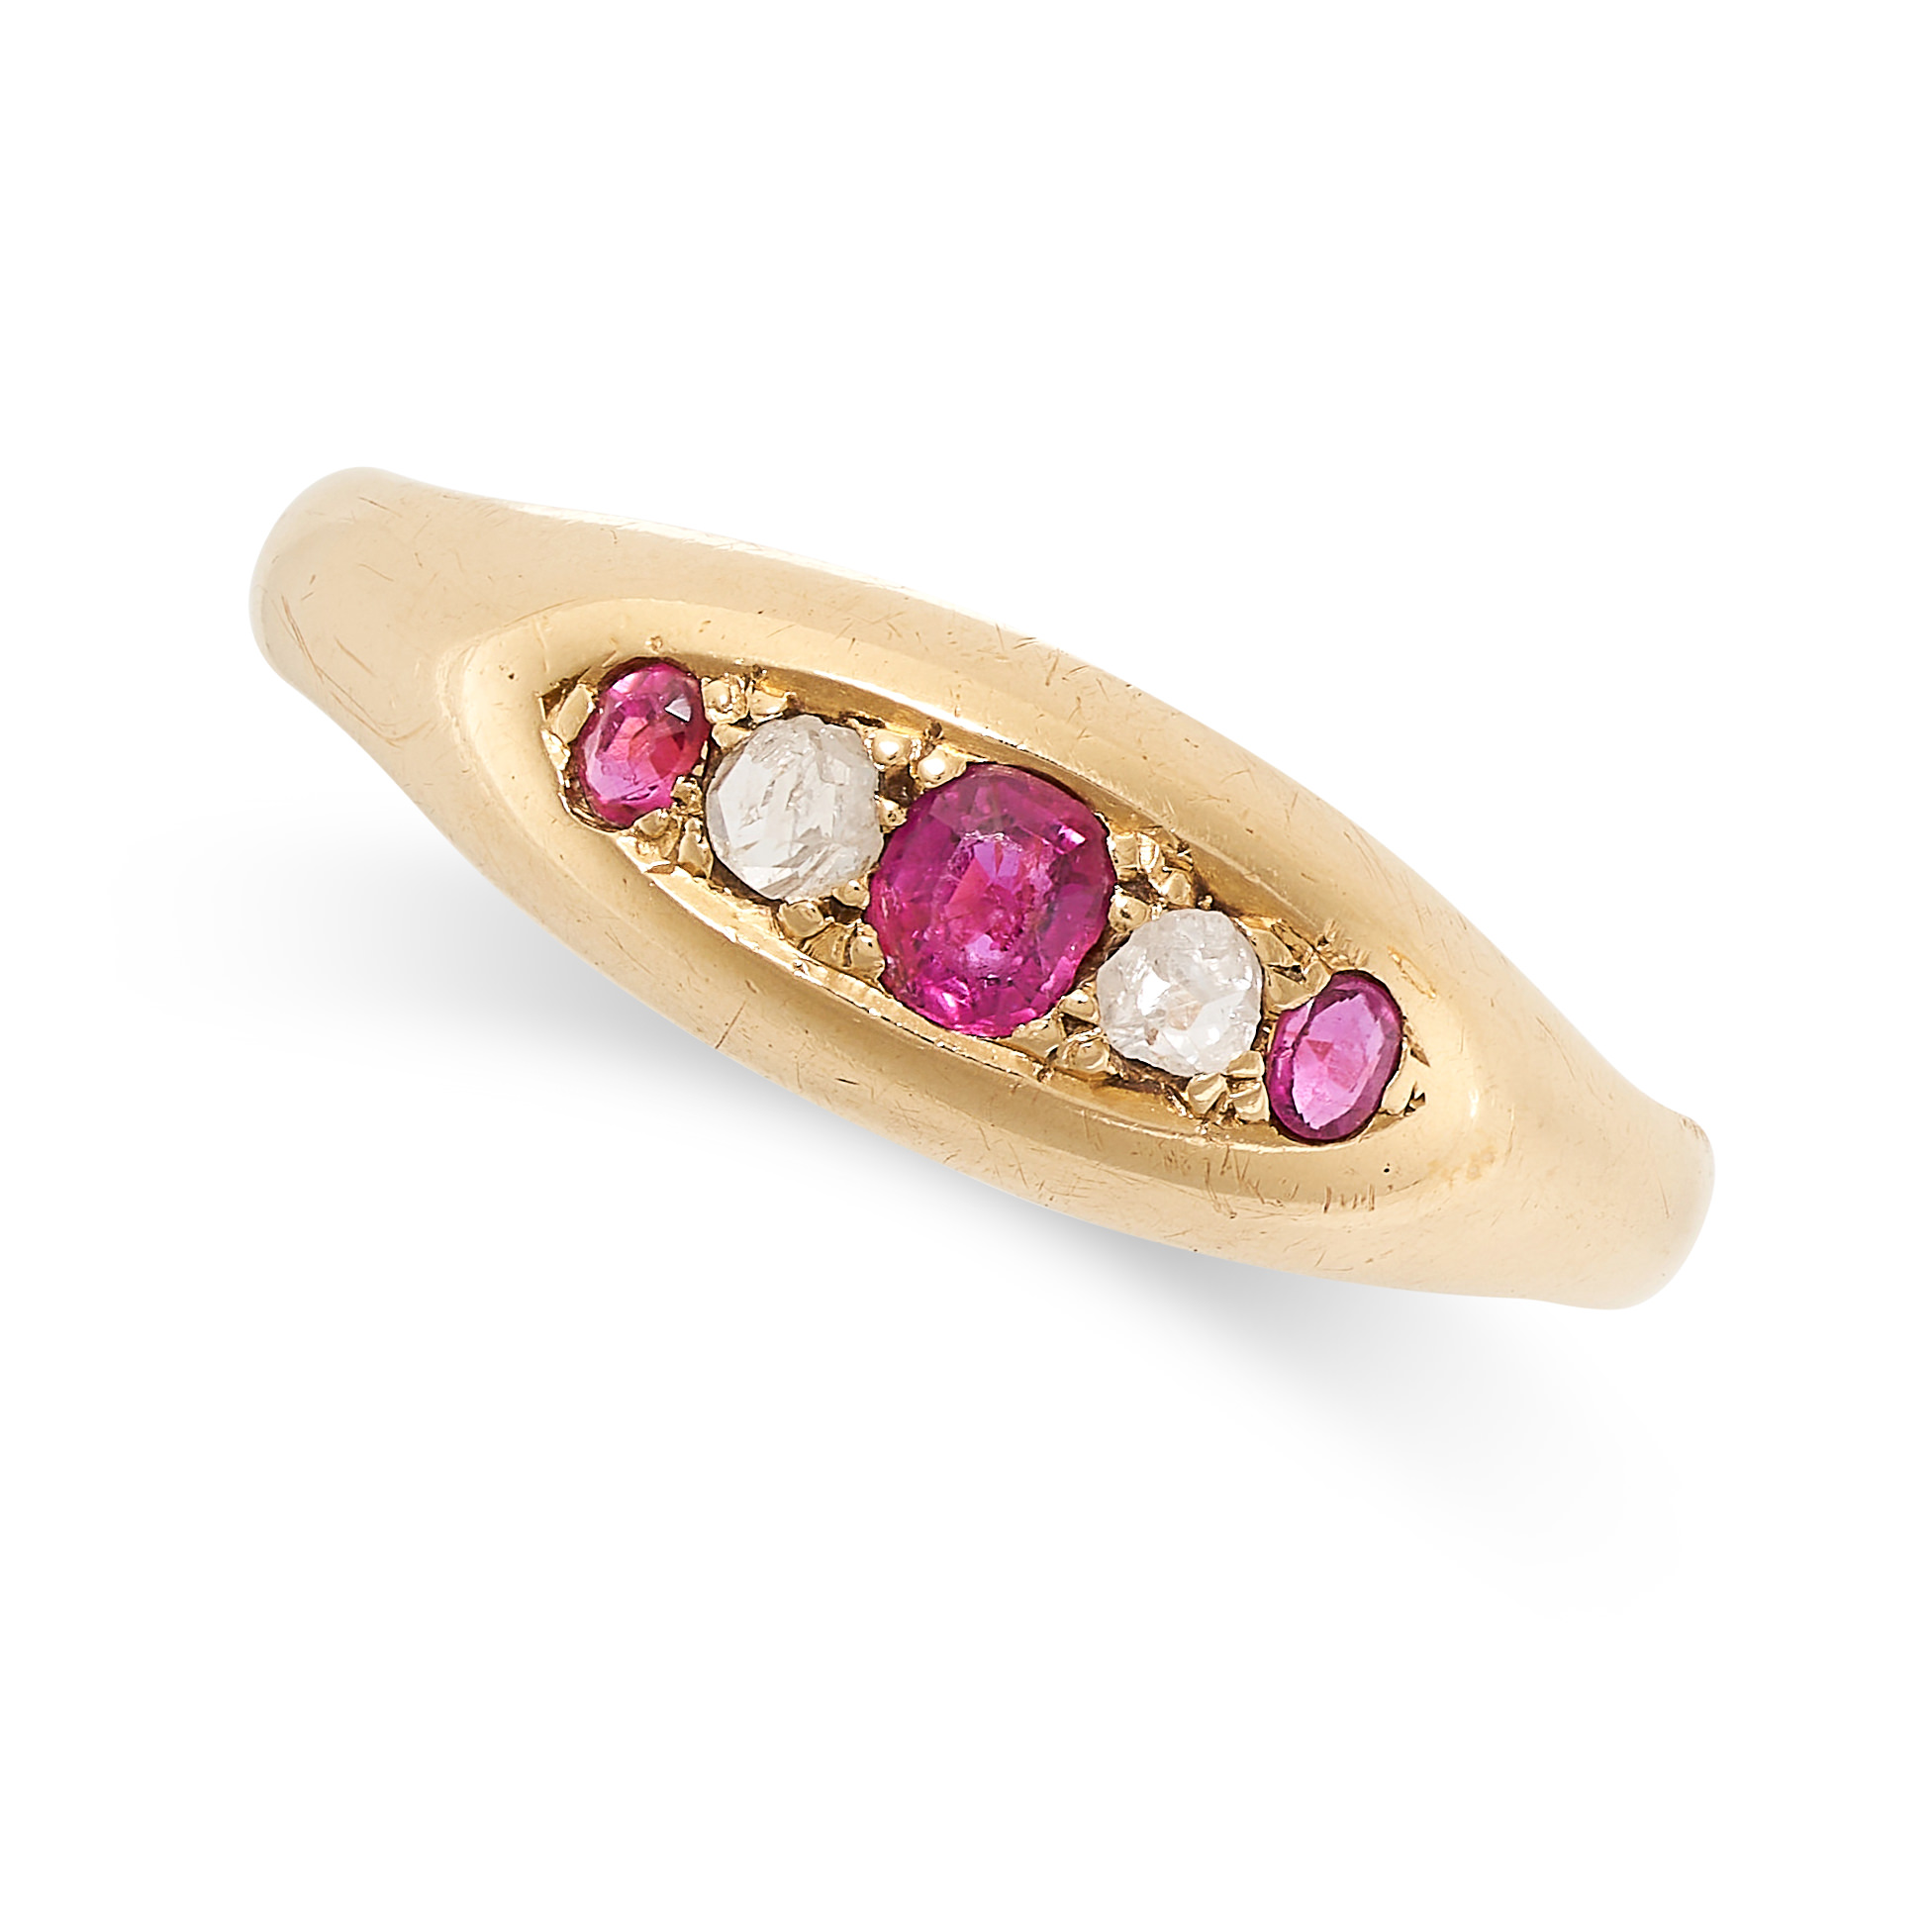 NO RESERVE - AN ANTIQUE EDWARDIAN RUBY AND DIAMOND DRESS RING, 1908 in 18ct yellow gold, the